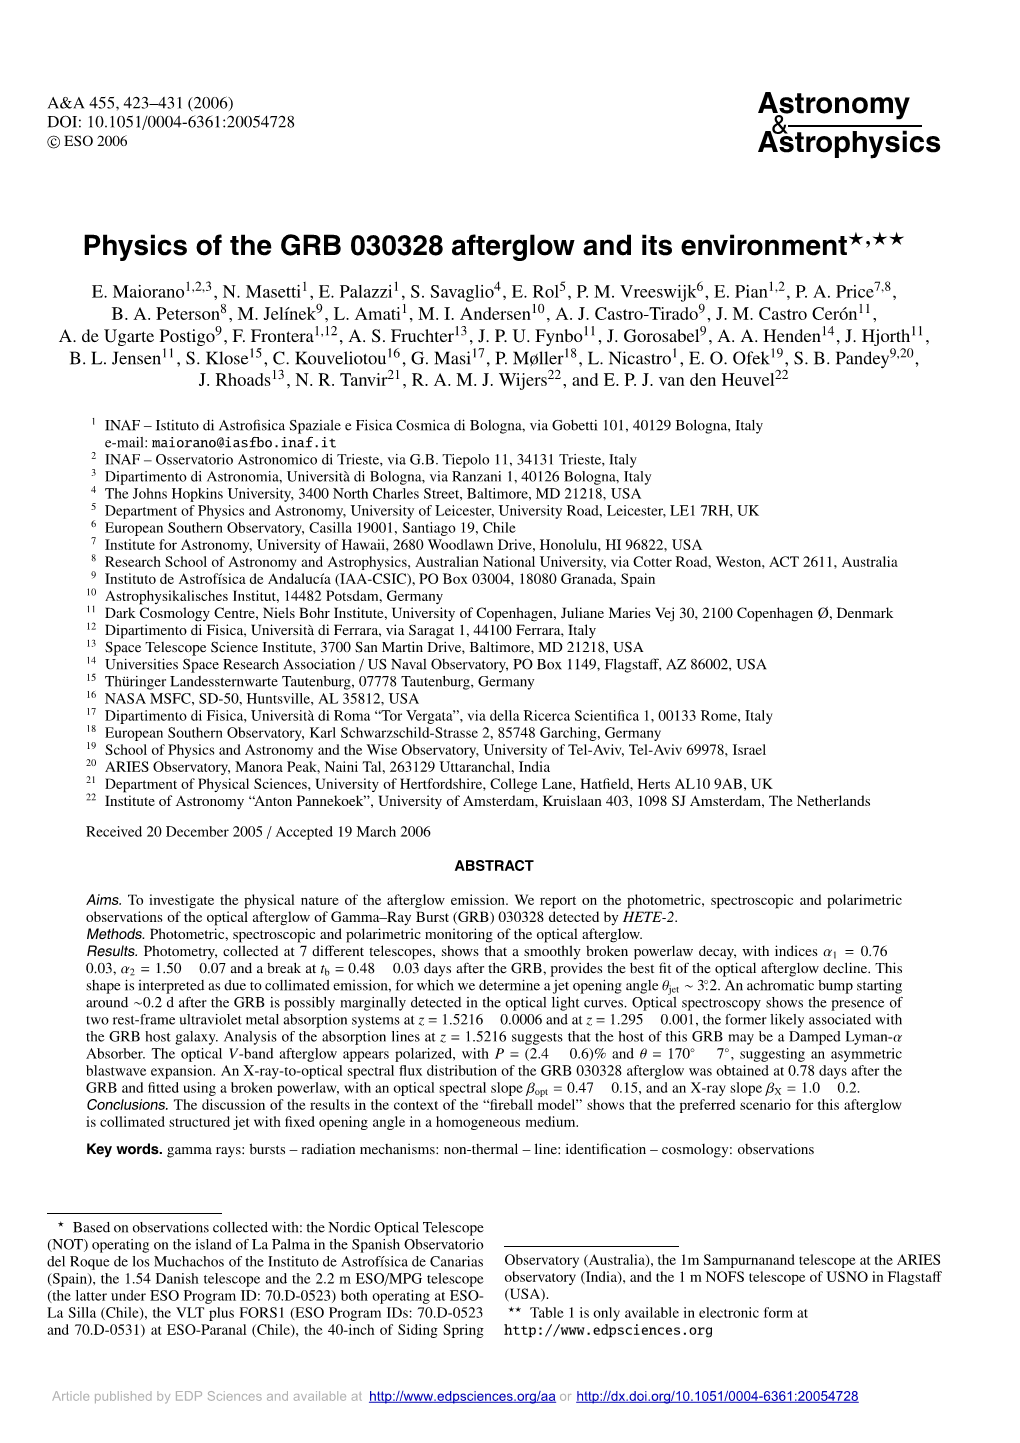 Physics of the GRB 030328 Afterglow and Its Environment�,